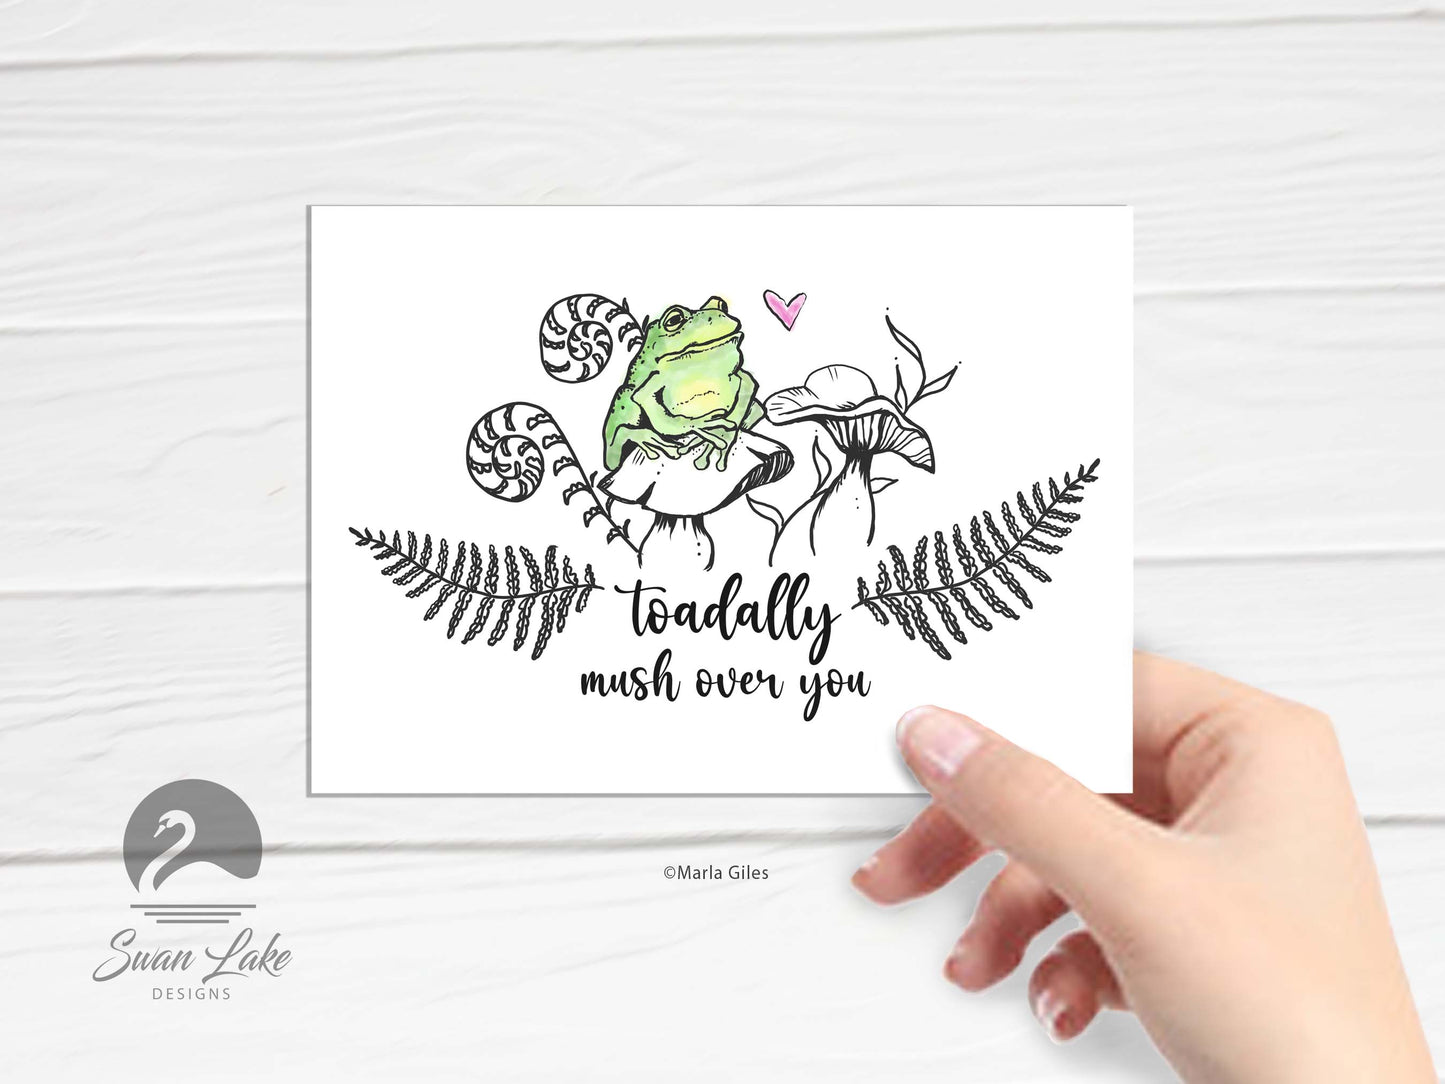 card - toad "toadally mush over you"  *free shipping